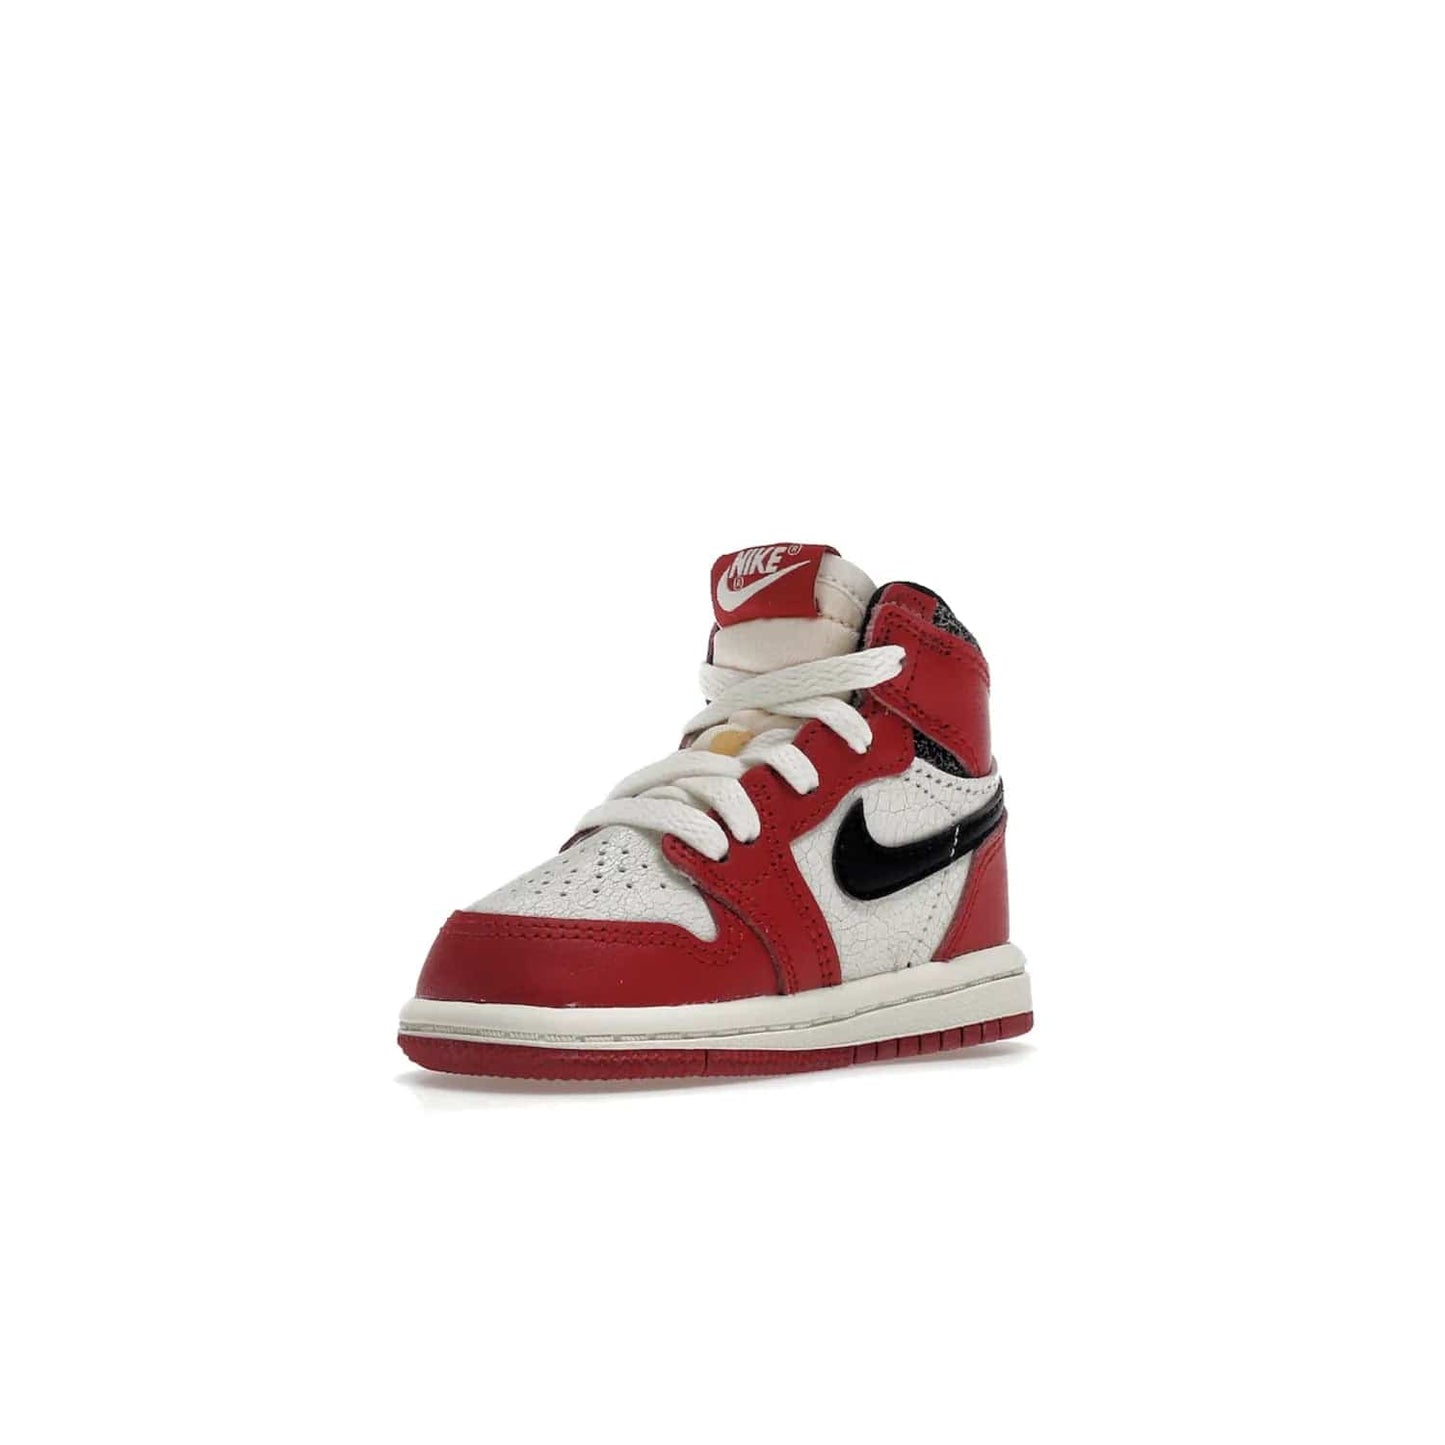 Jordan 1 Retro High OG Chicago Lost and Found (TD) - Image 15 - Only at www.BallersClubKickz.com - Introducing the Air Jordan 1 Retro High OG Lost and Found TD – a vibrant combination of 4 colors: muslin, varsity, sail and black. Featuring a crackled leather upper and AIR units for comfort and a signature Wings logo, these retro shoes add comfort and style for your little ones at $70. Get your pair before 19th December 2022!